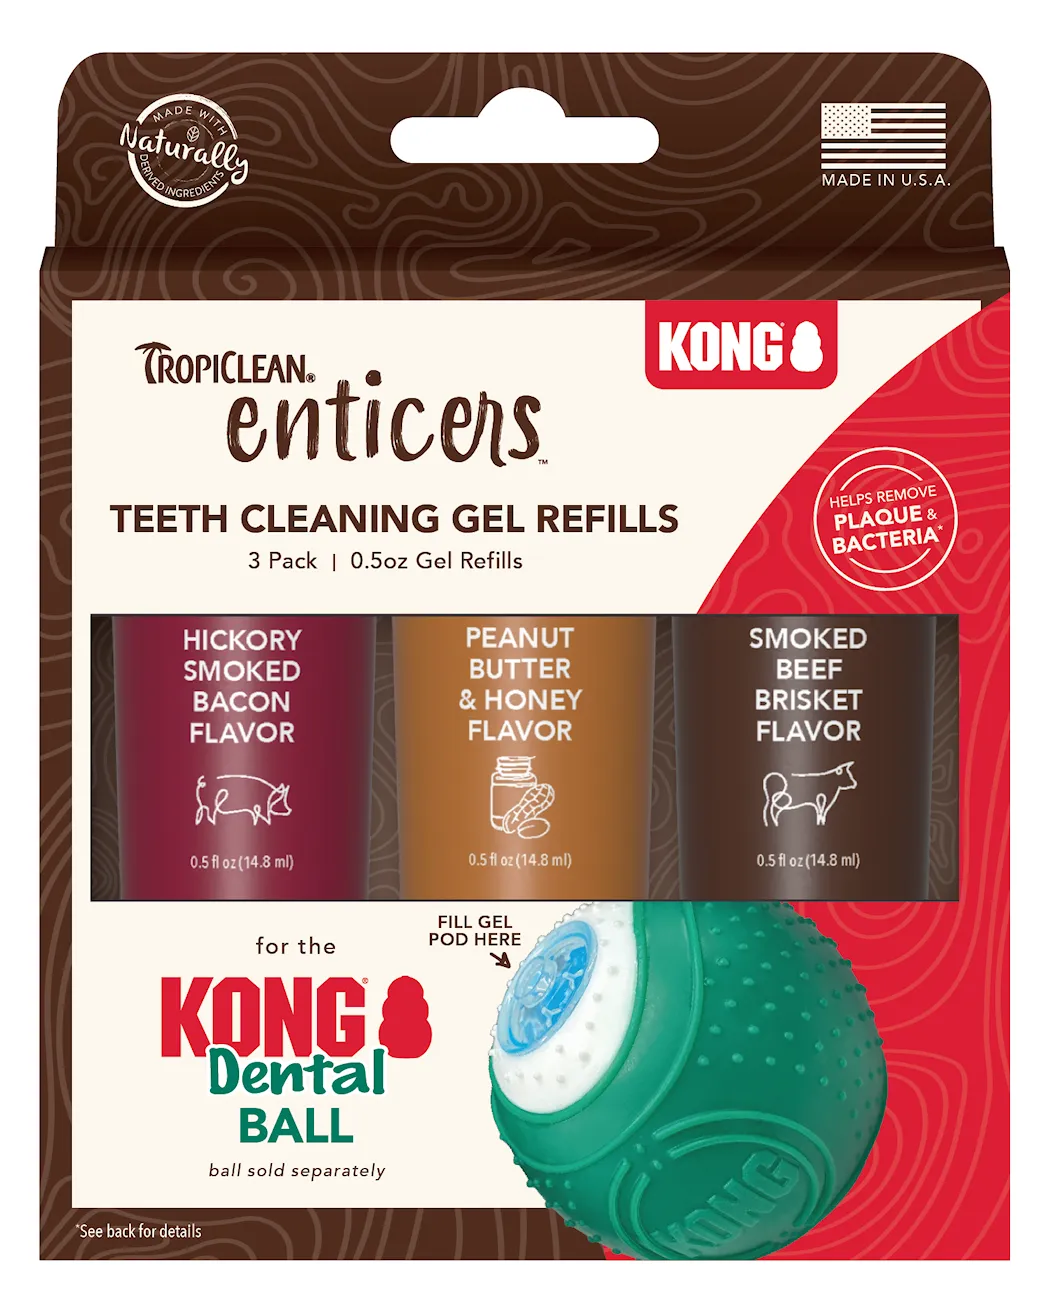 Enticers Teeth Cleaning Gel Variety Pack for KONG Dental Ball 3-pack